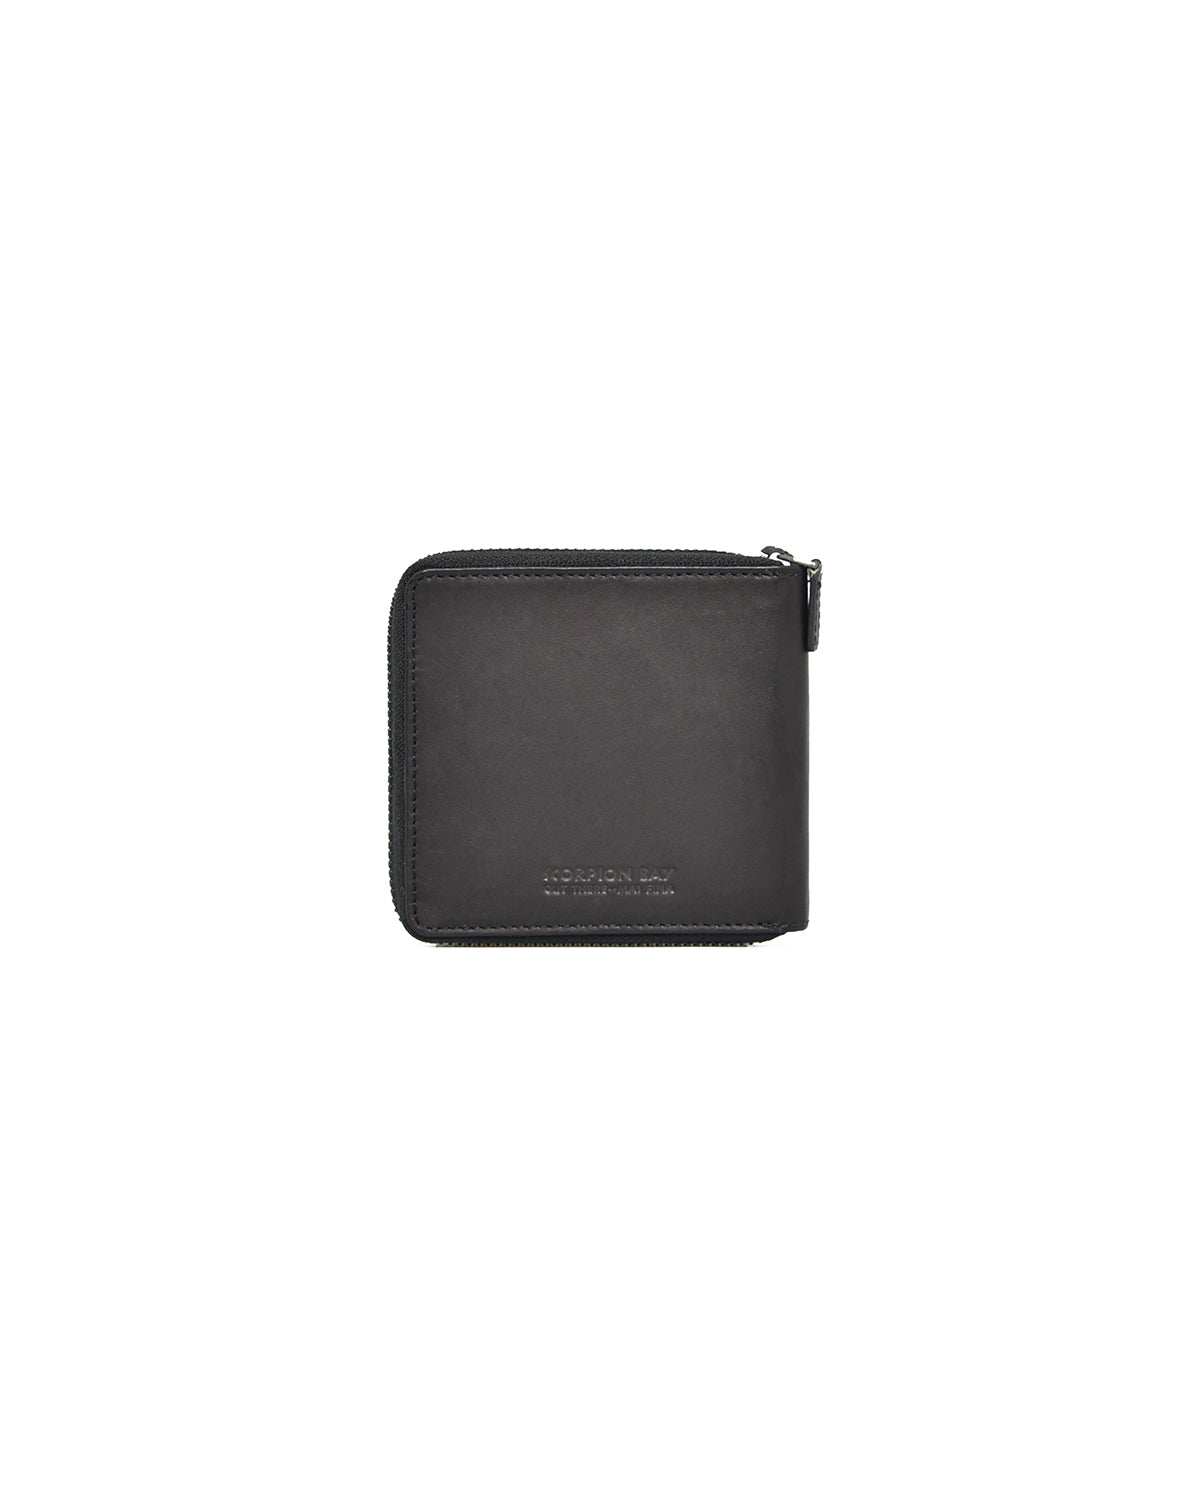 Black Leather Zippered Wallet